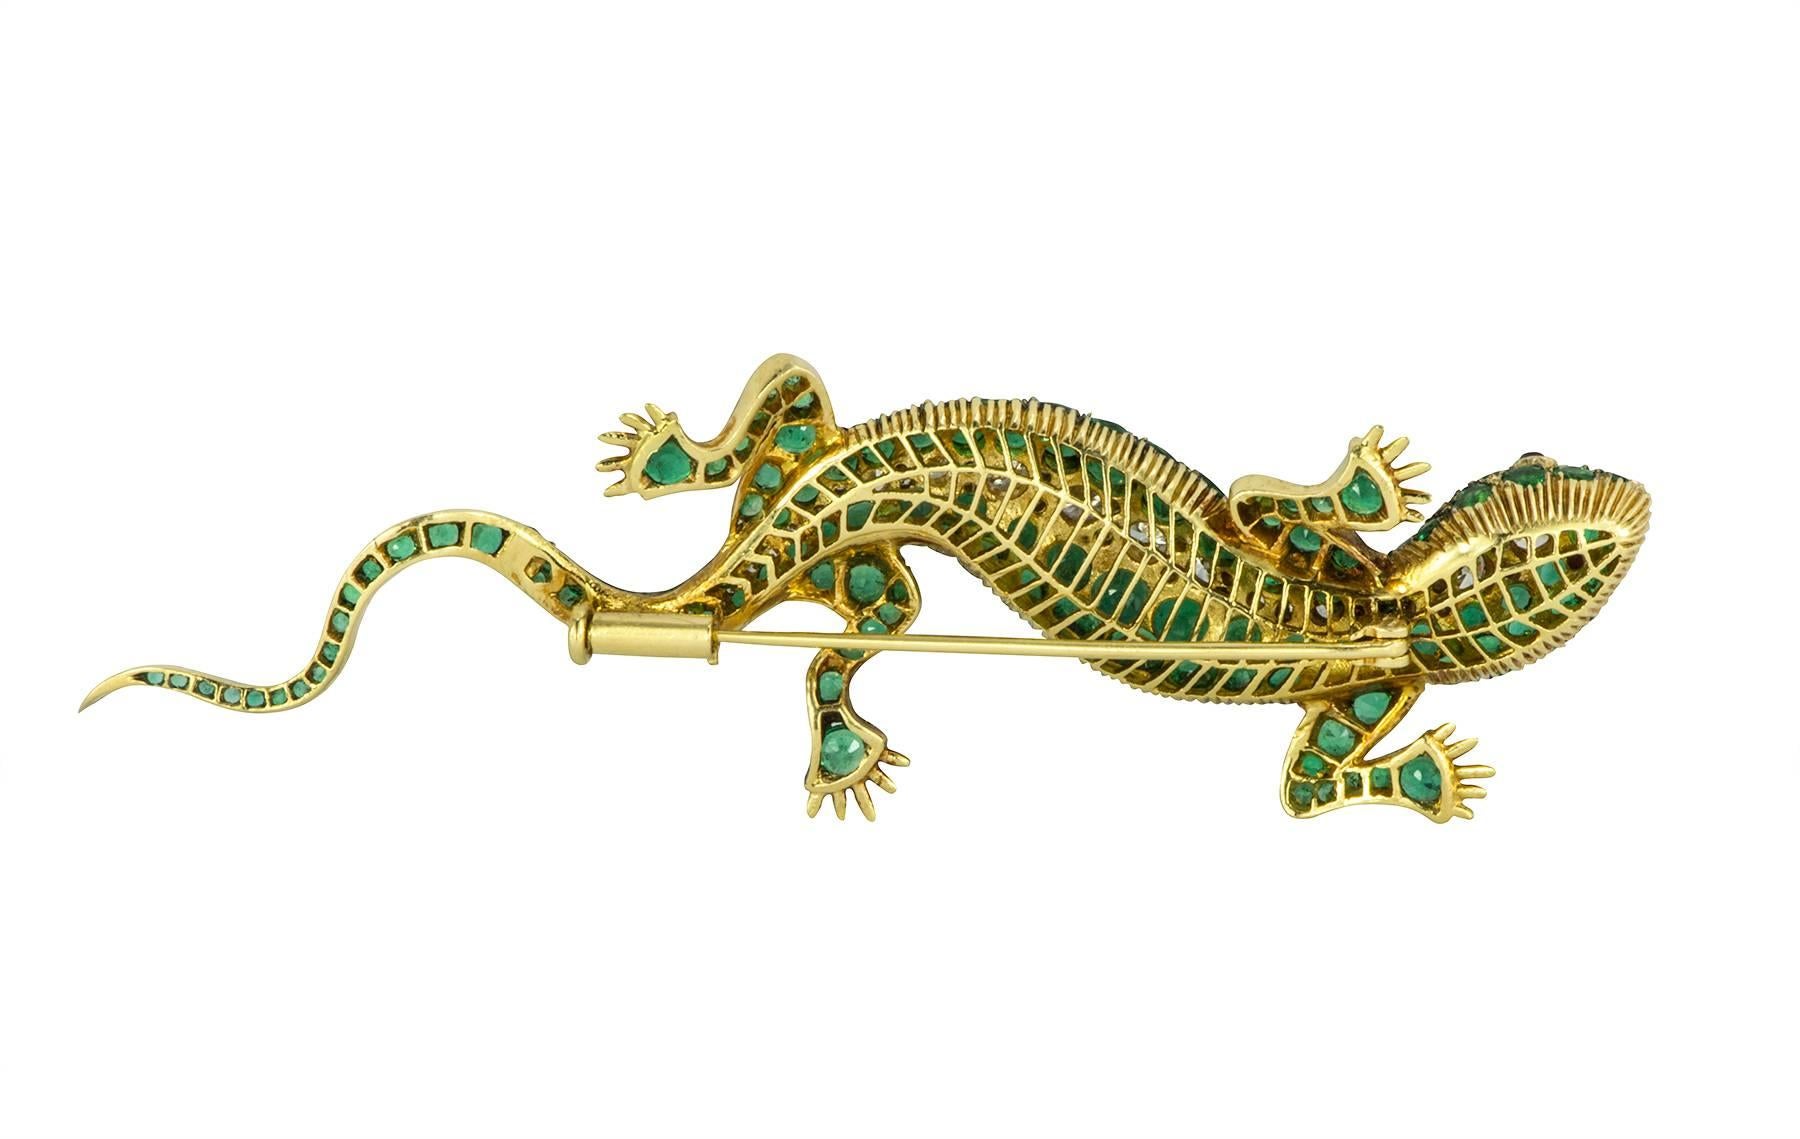 Emerald and diamond 18k yellow gold lizard brooch with ruby eyes.  The lizard contains an estimated 6.26cts in round cut emeralds, with an estimated 2.10cts in round brilliant diamonds.  The ruby eyes are approximately .10cts total.  The color of